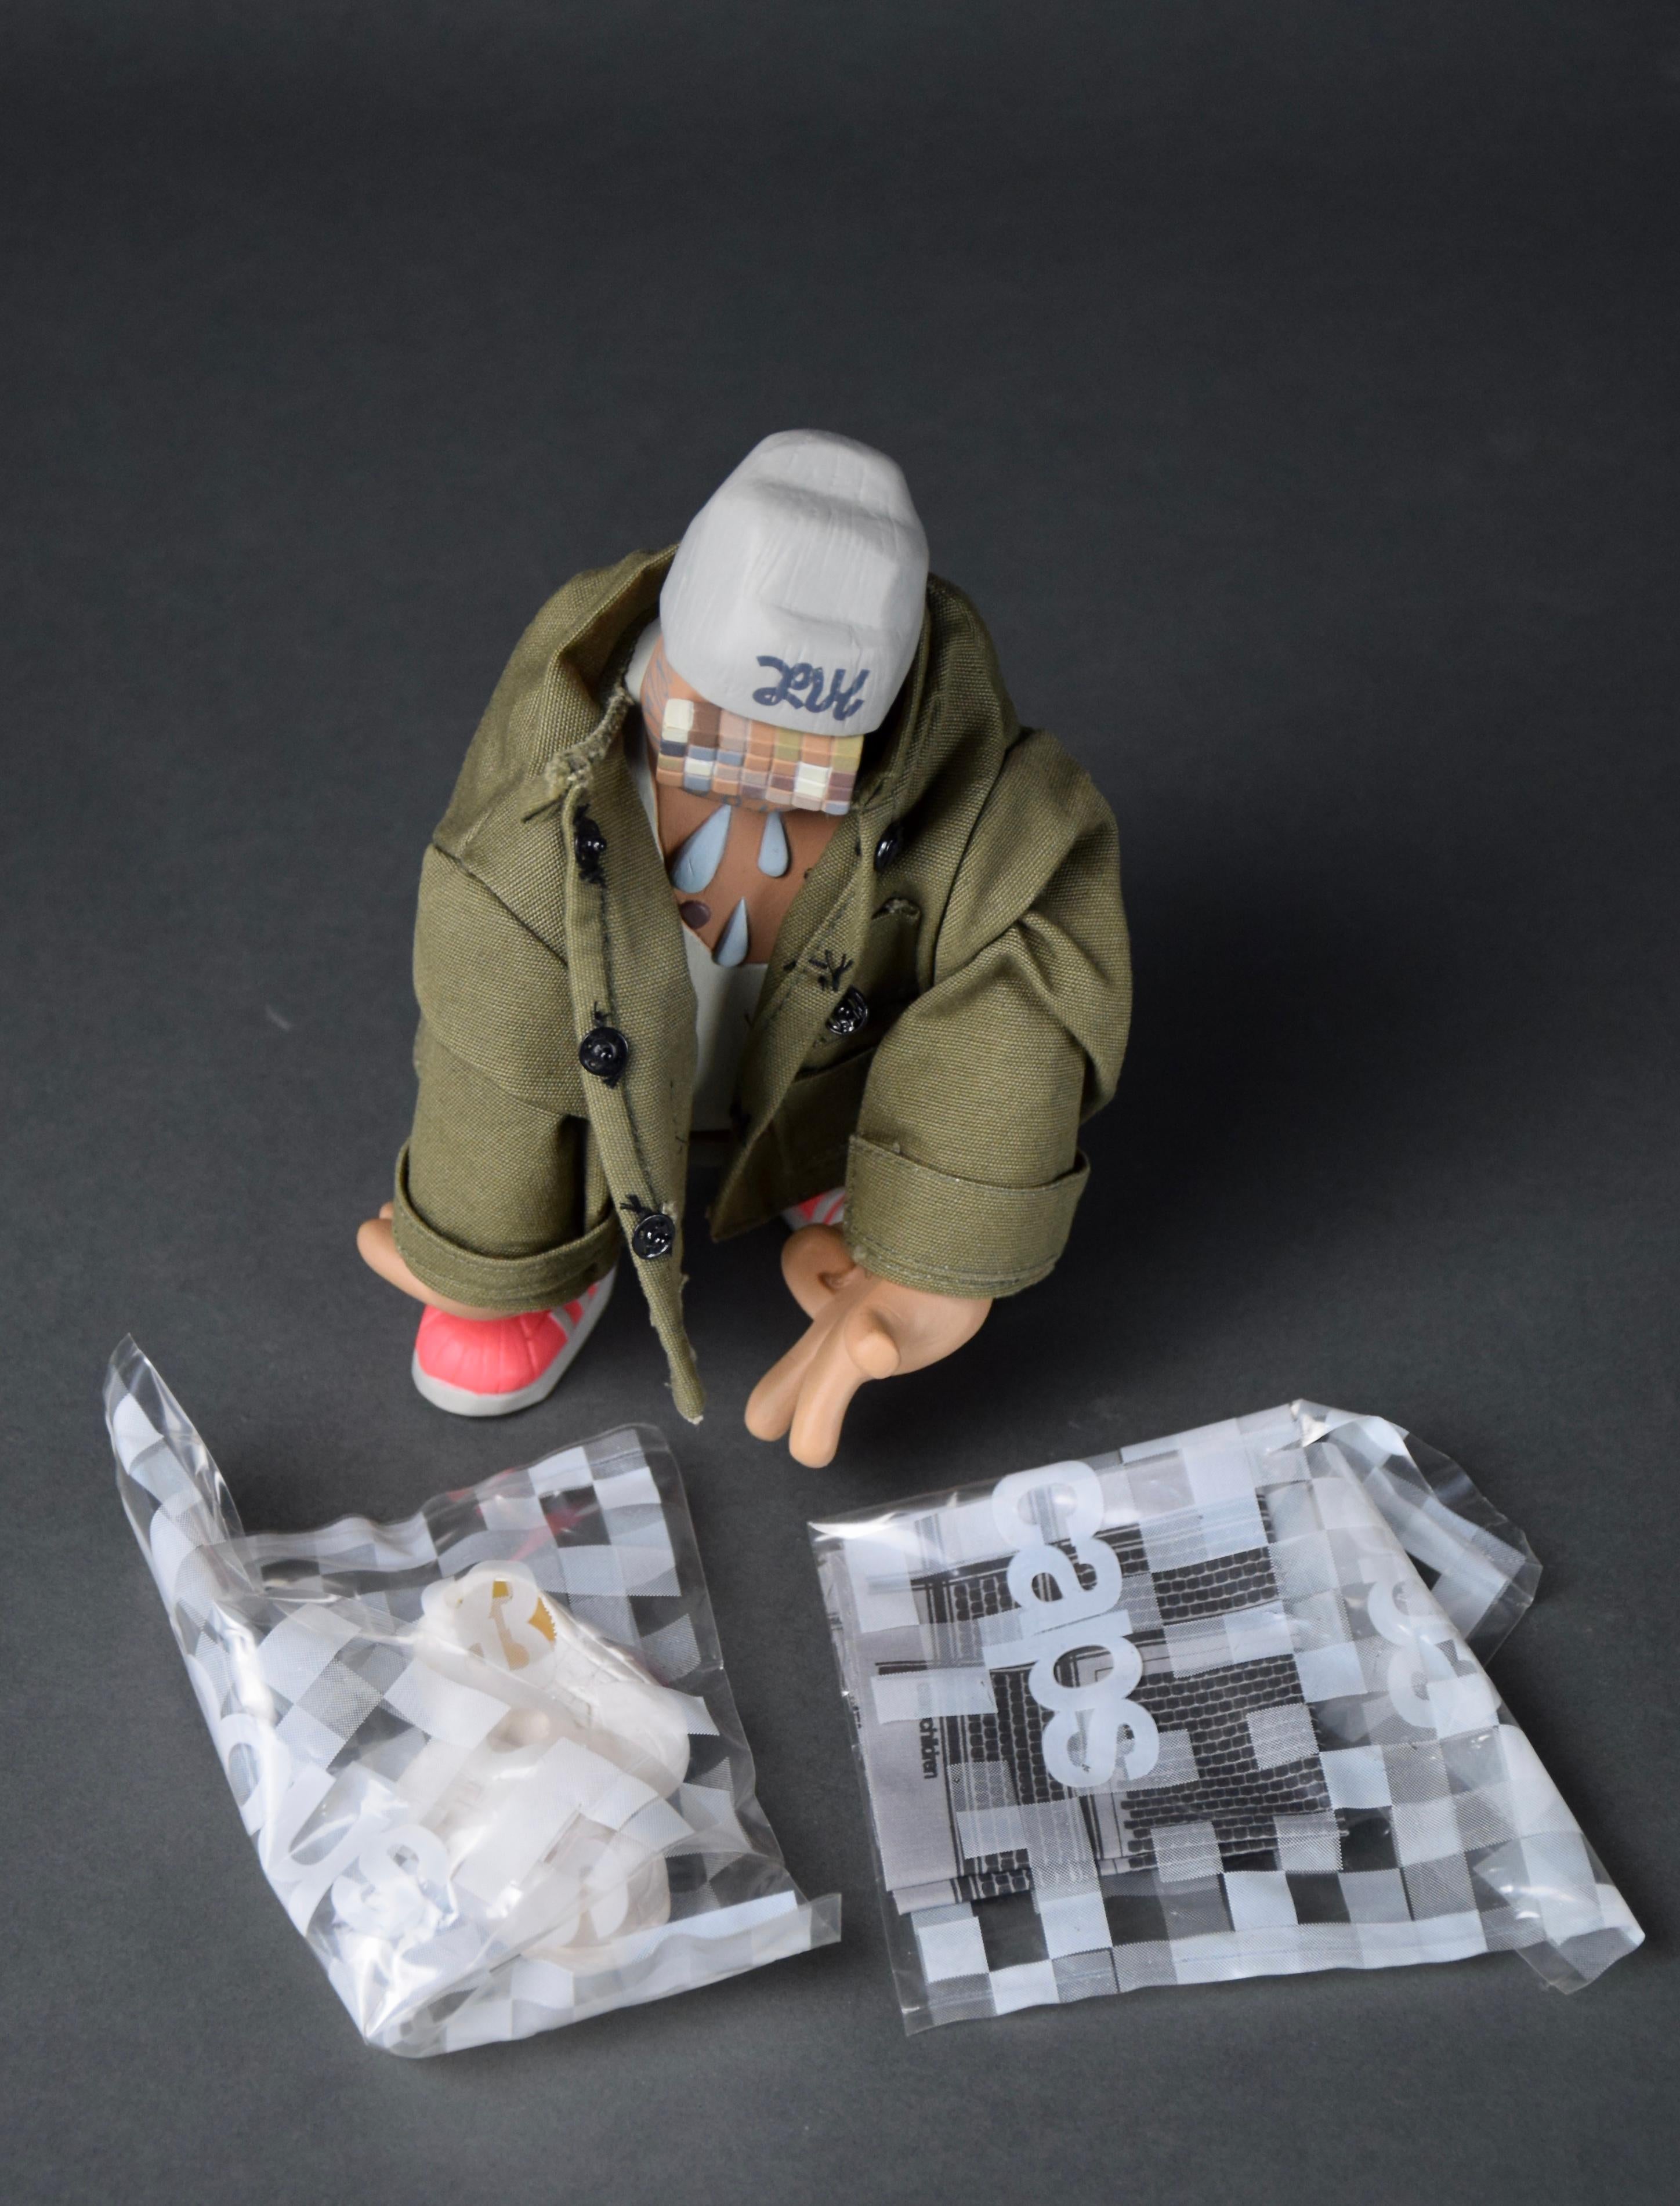 Mr. B limited edition of 200 pcs 2001 Art Toy from the Crazy Children series by Michael Lau. Produced by Crazy Smiles. This rare piece comes with it's original box, Jacket, Cap, Adidas Shoes and Scarf all in great condition. Mr. B has never been